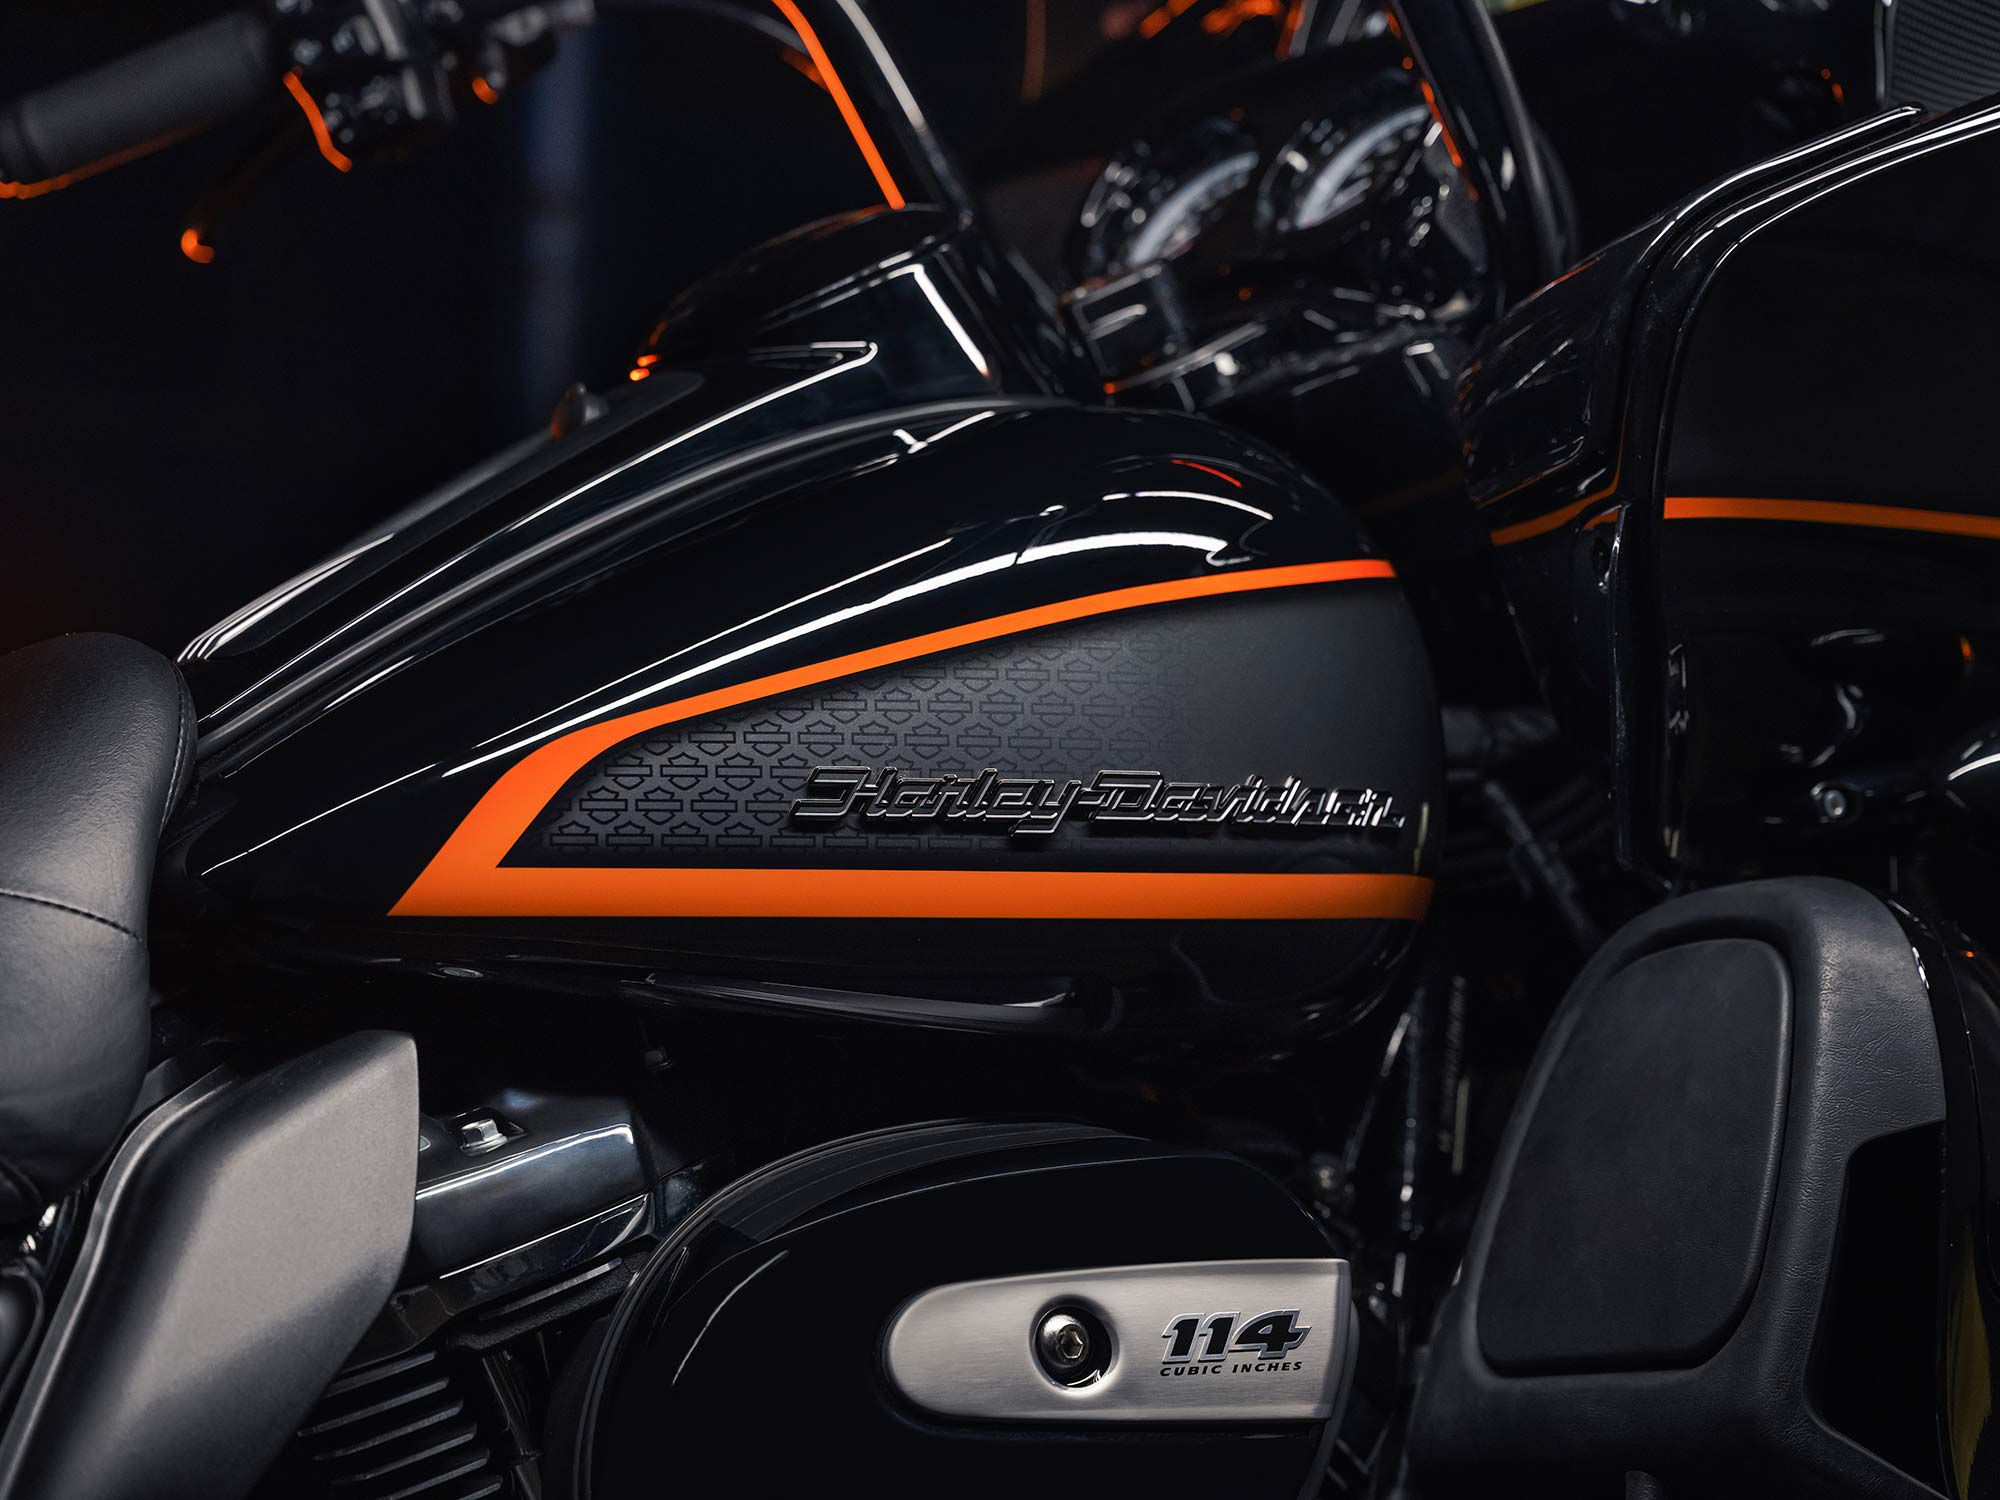 Details of the new Apex paint are largely inspired by the XR-750 racebike.